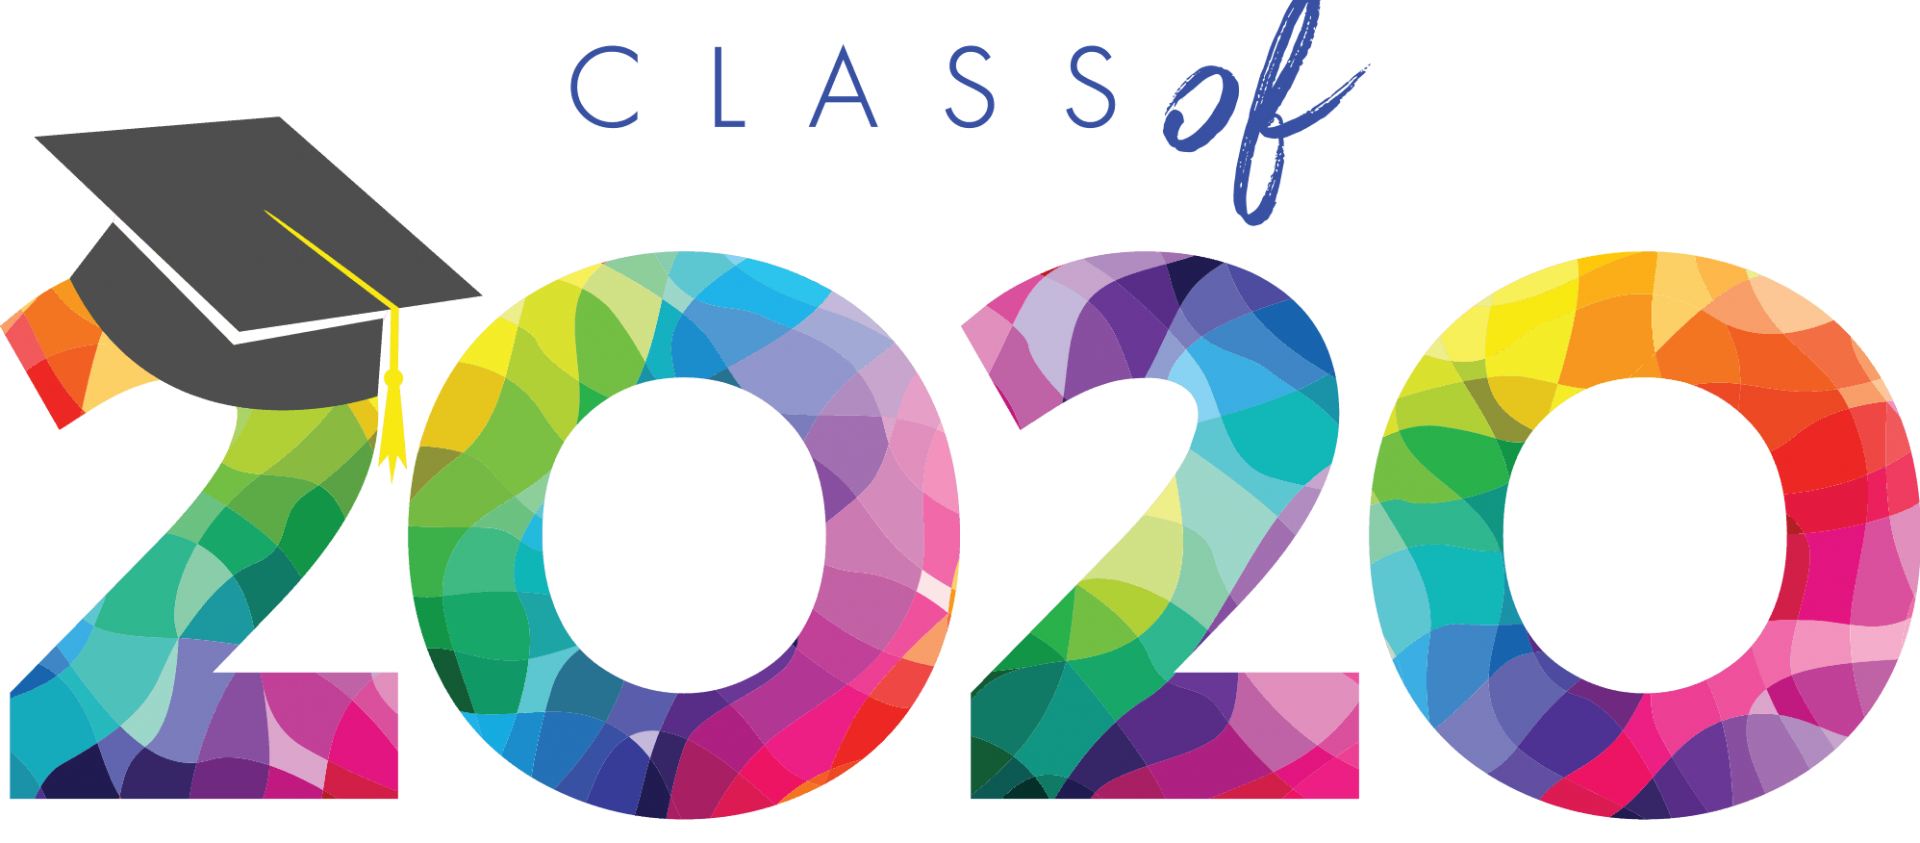 classs of 2020 - only image